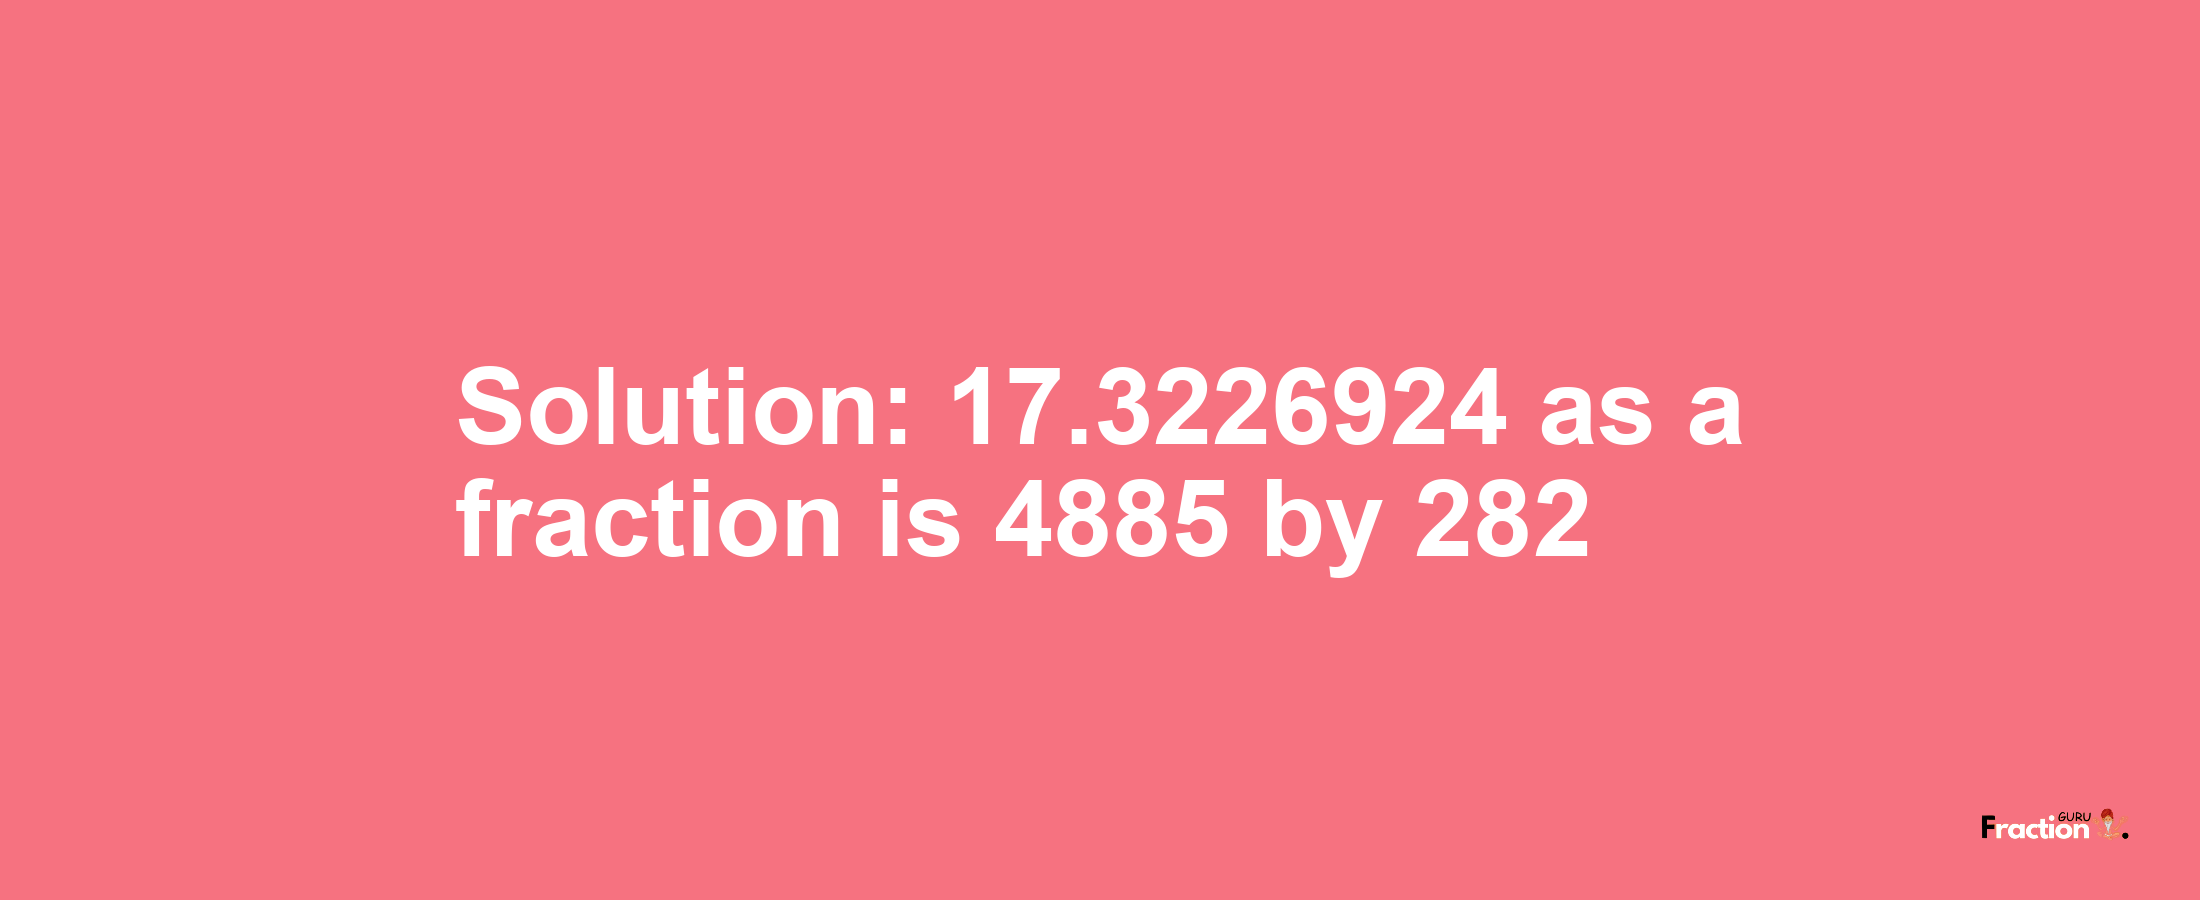 Solution:17.3226924 as a fraction is 4885/282